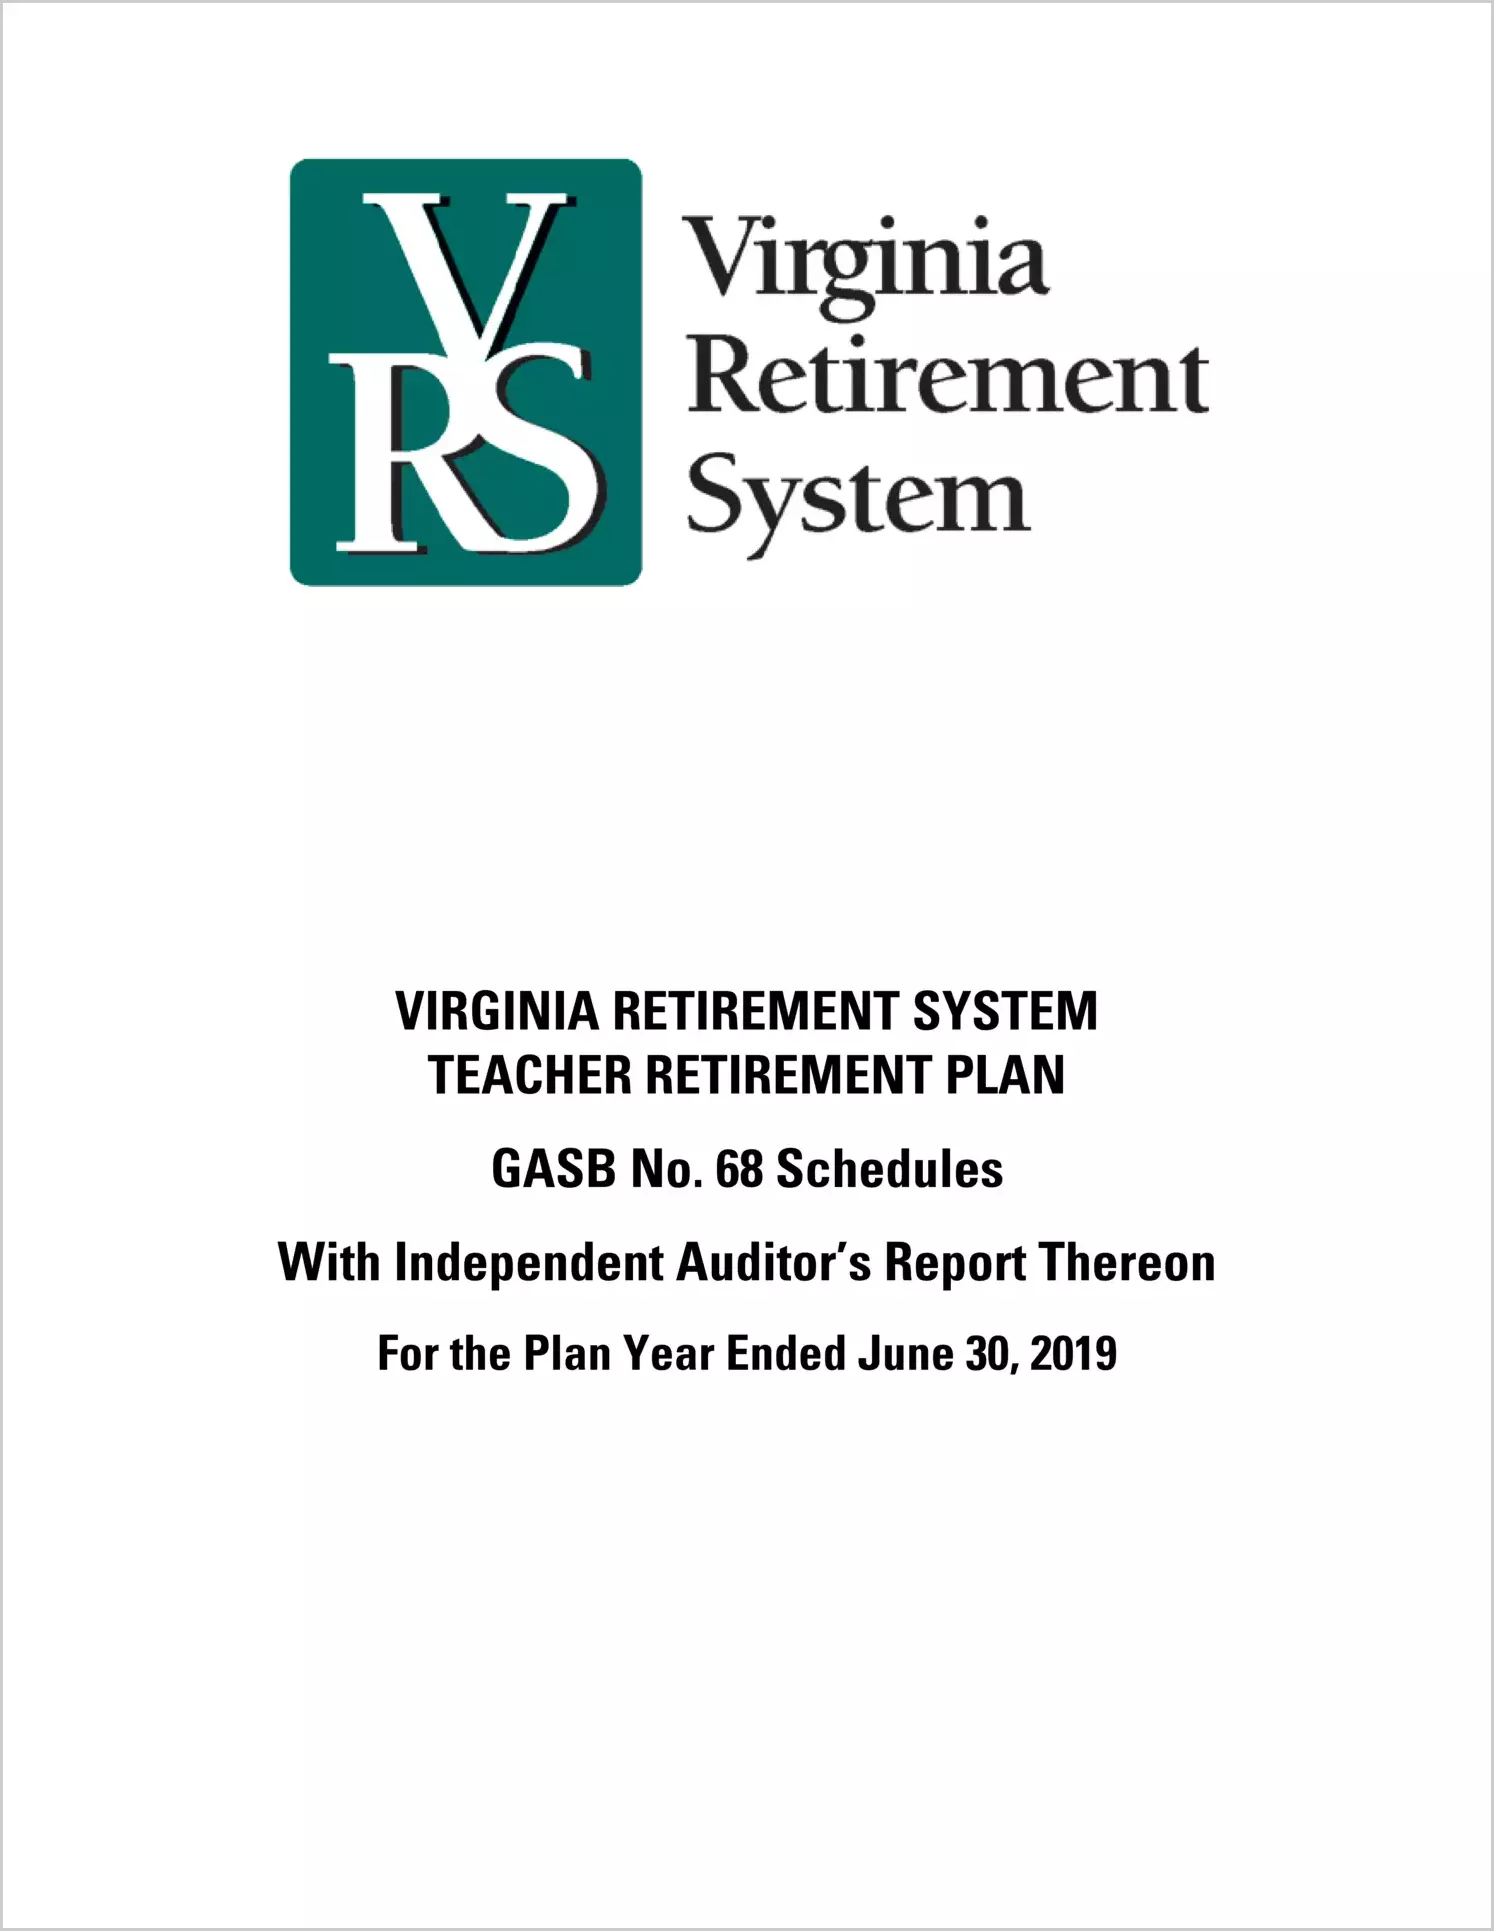 GASB 68 Schedule - Virginia Retirement System Teacher Retirement Plan for the year ended June 30, 2019